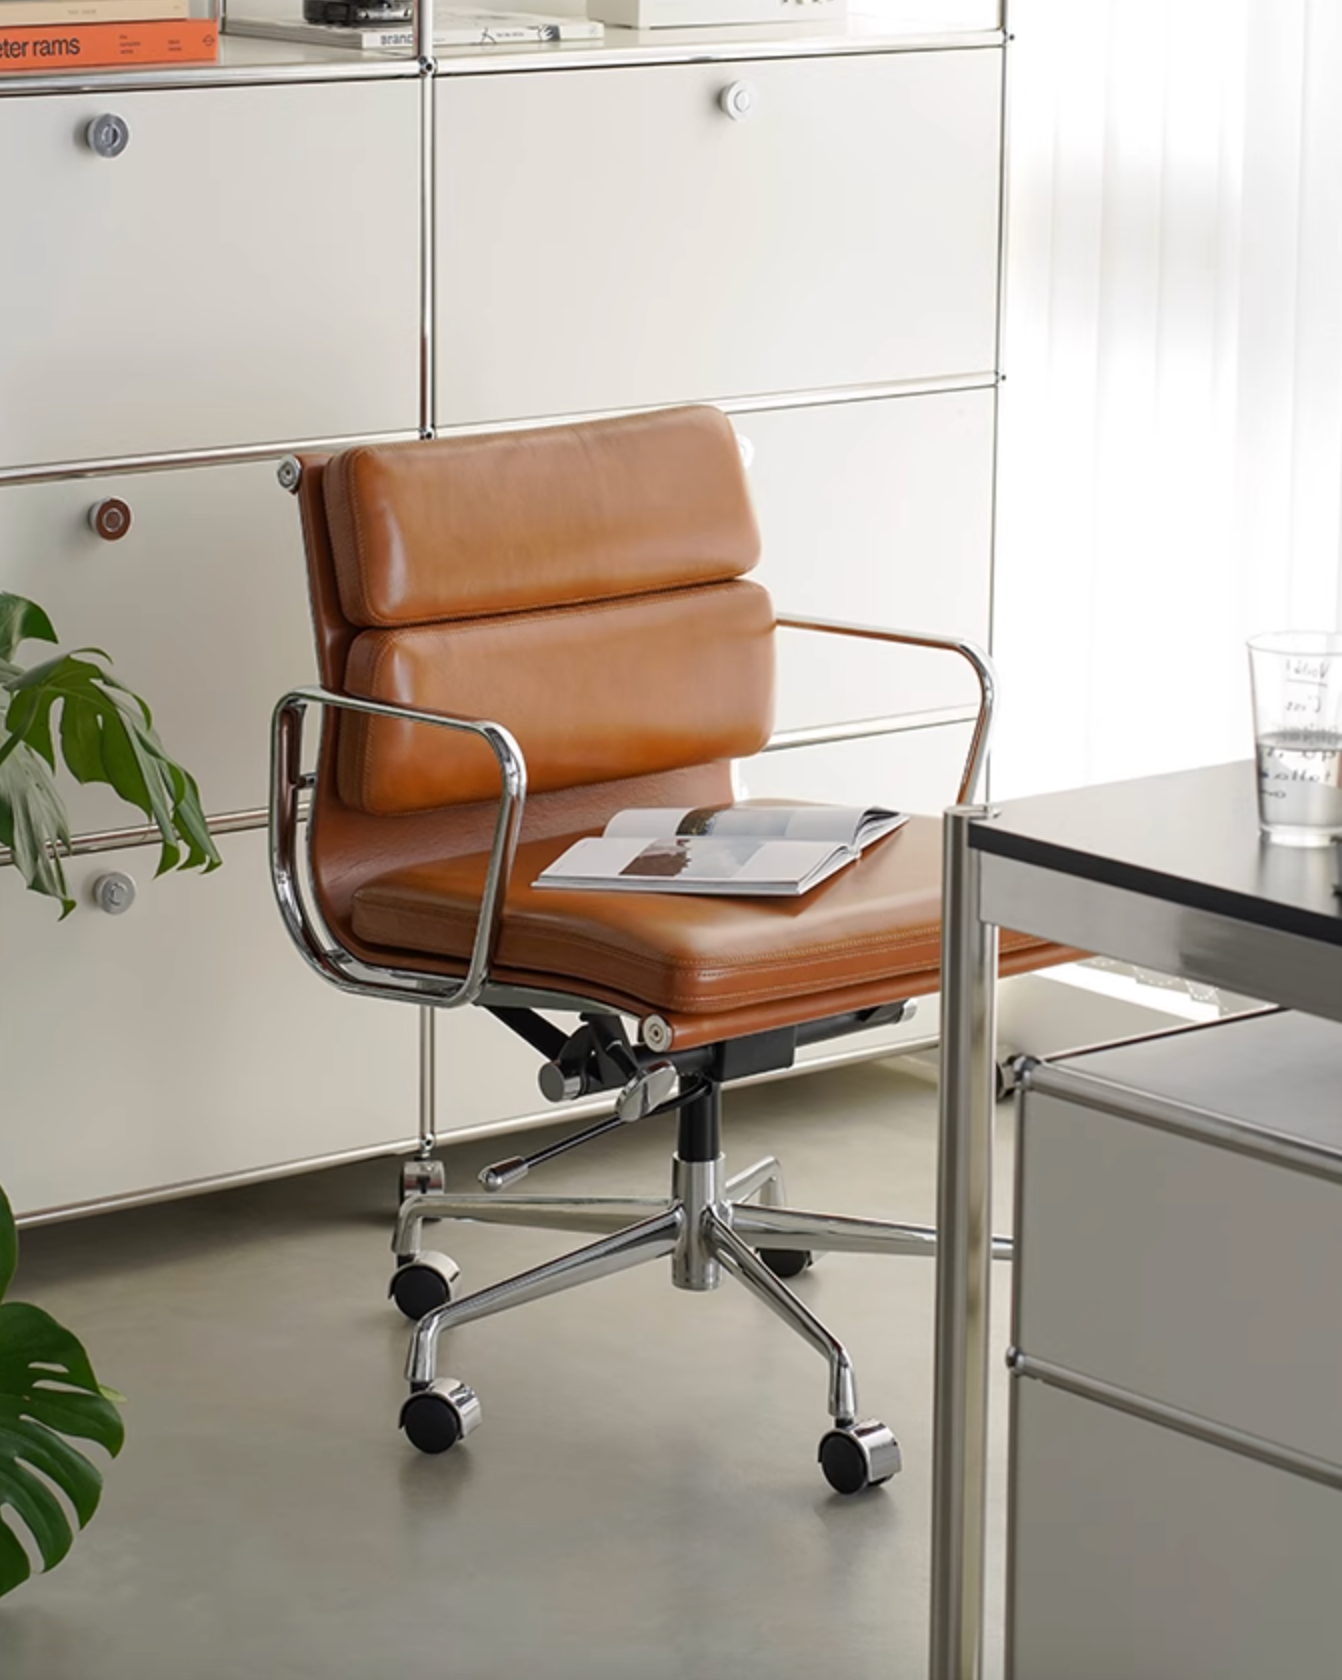 Marley Office Chair With Swivel, Lift